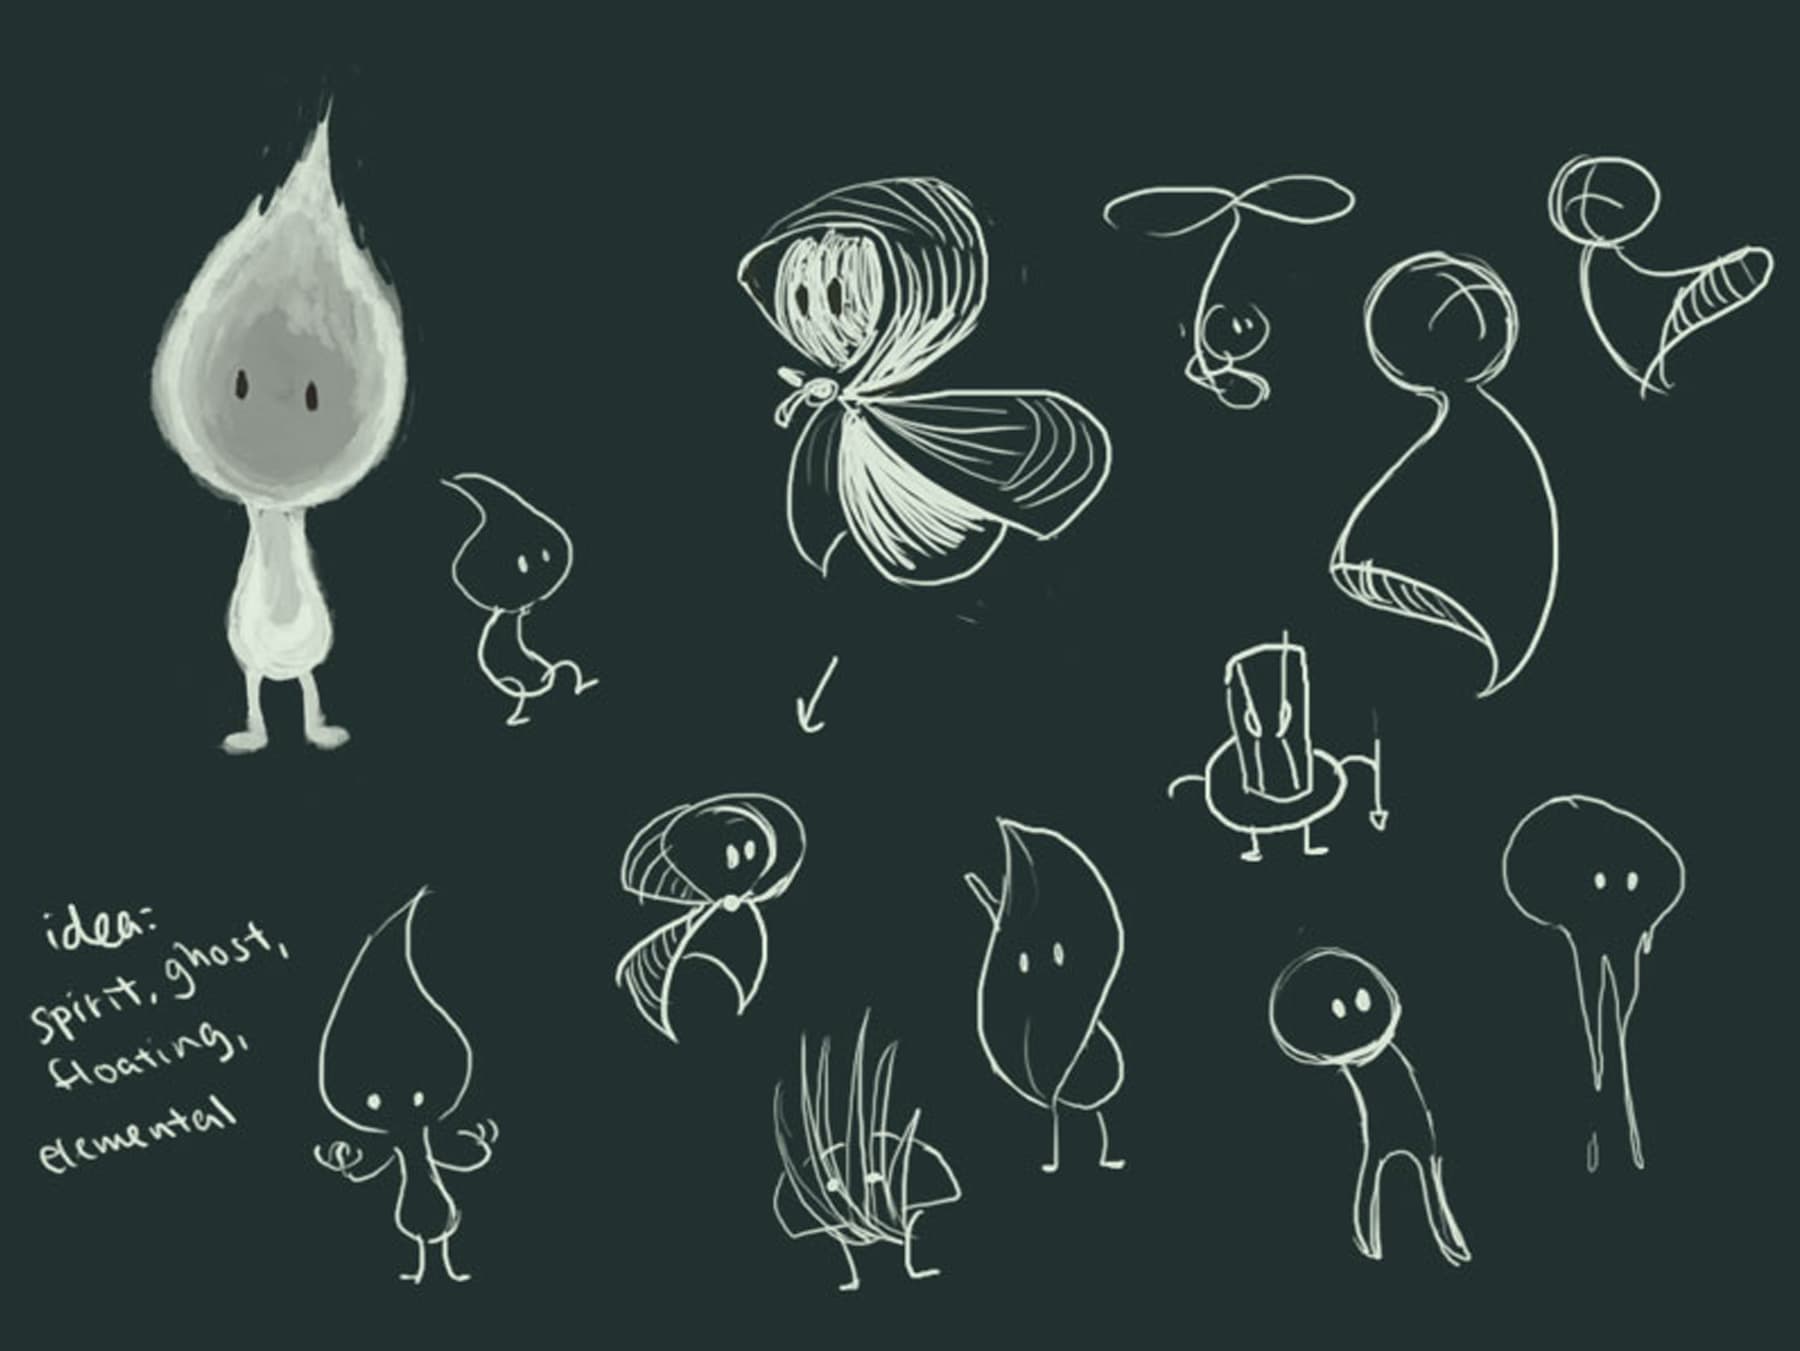 Sketches of the rain sprite in various poses